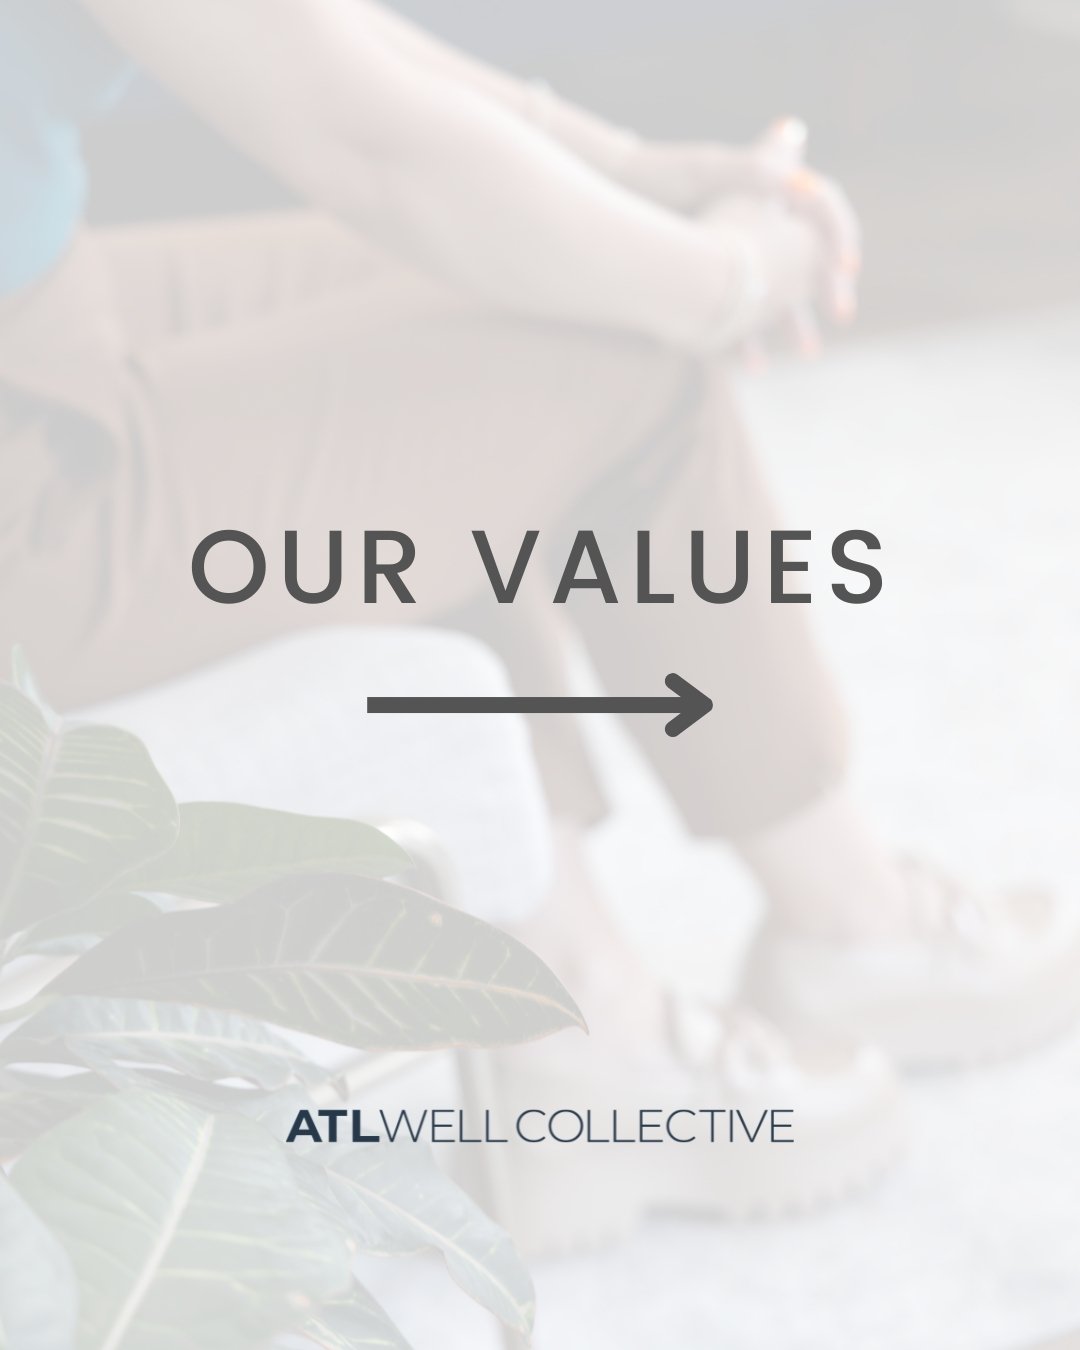 We have 4 values at Atlanta Wellness Collective:

✨⁣⁣⁣⁣⁣⁣⁣Integrity
✨⁣⁣⁣⁣⁣⁣⁣Holistic Wellness
✨⁣⁣⁣⁣⁣⁣⁣Community
✨⁣⁣⁣⁣⁣⁣⁣Accountability

Swipe ➡️ to read more about them

#atlwell #livelifewell